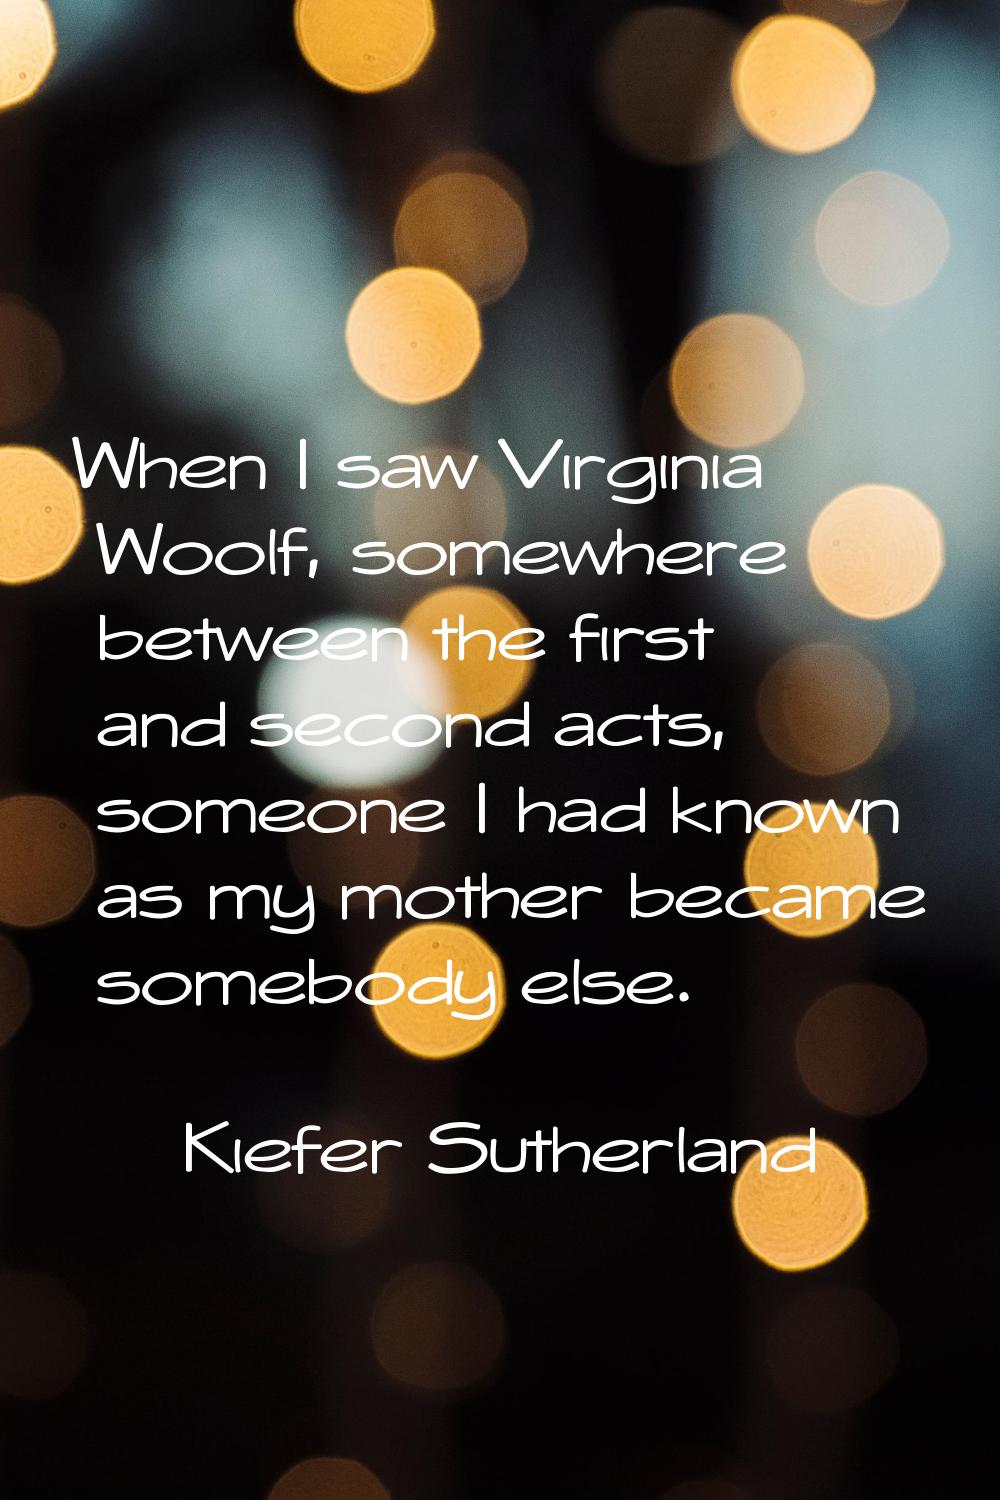 When I saw Virginia Woolf, somewhere between the first and second acts, someone I had known as my m